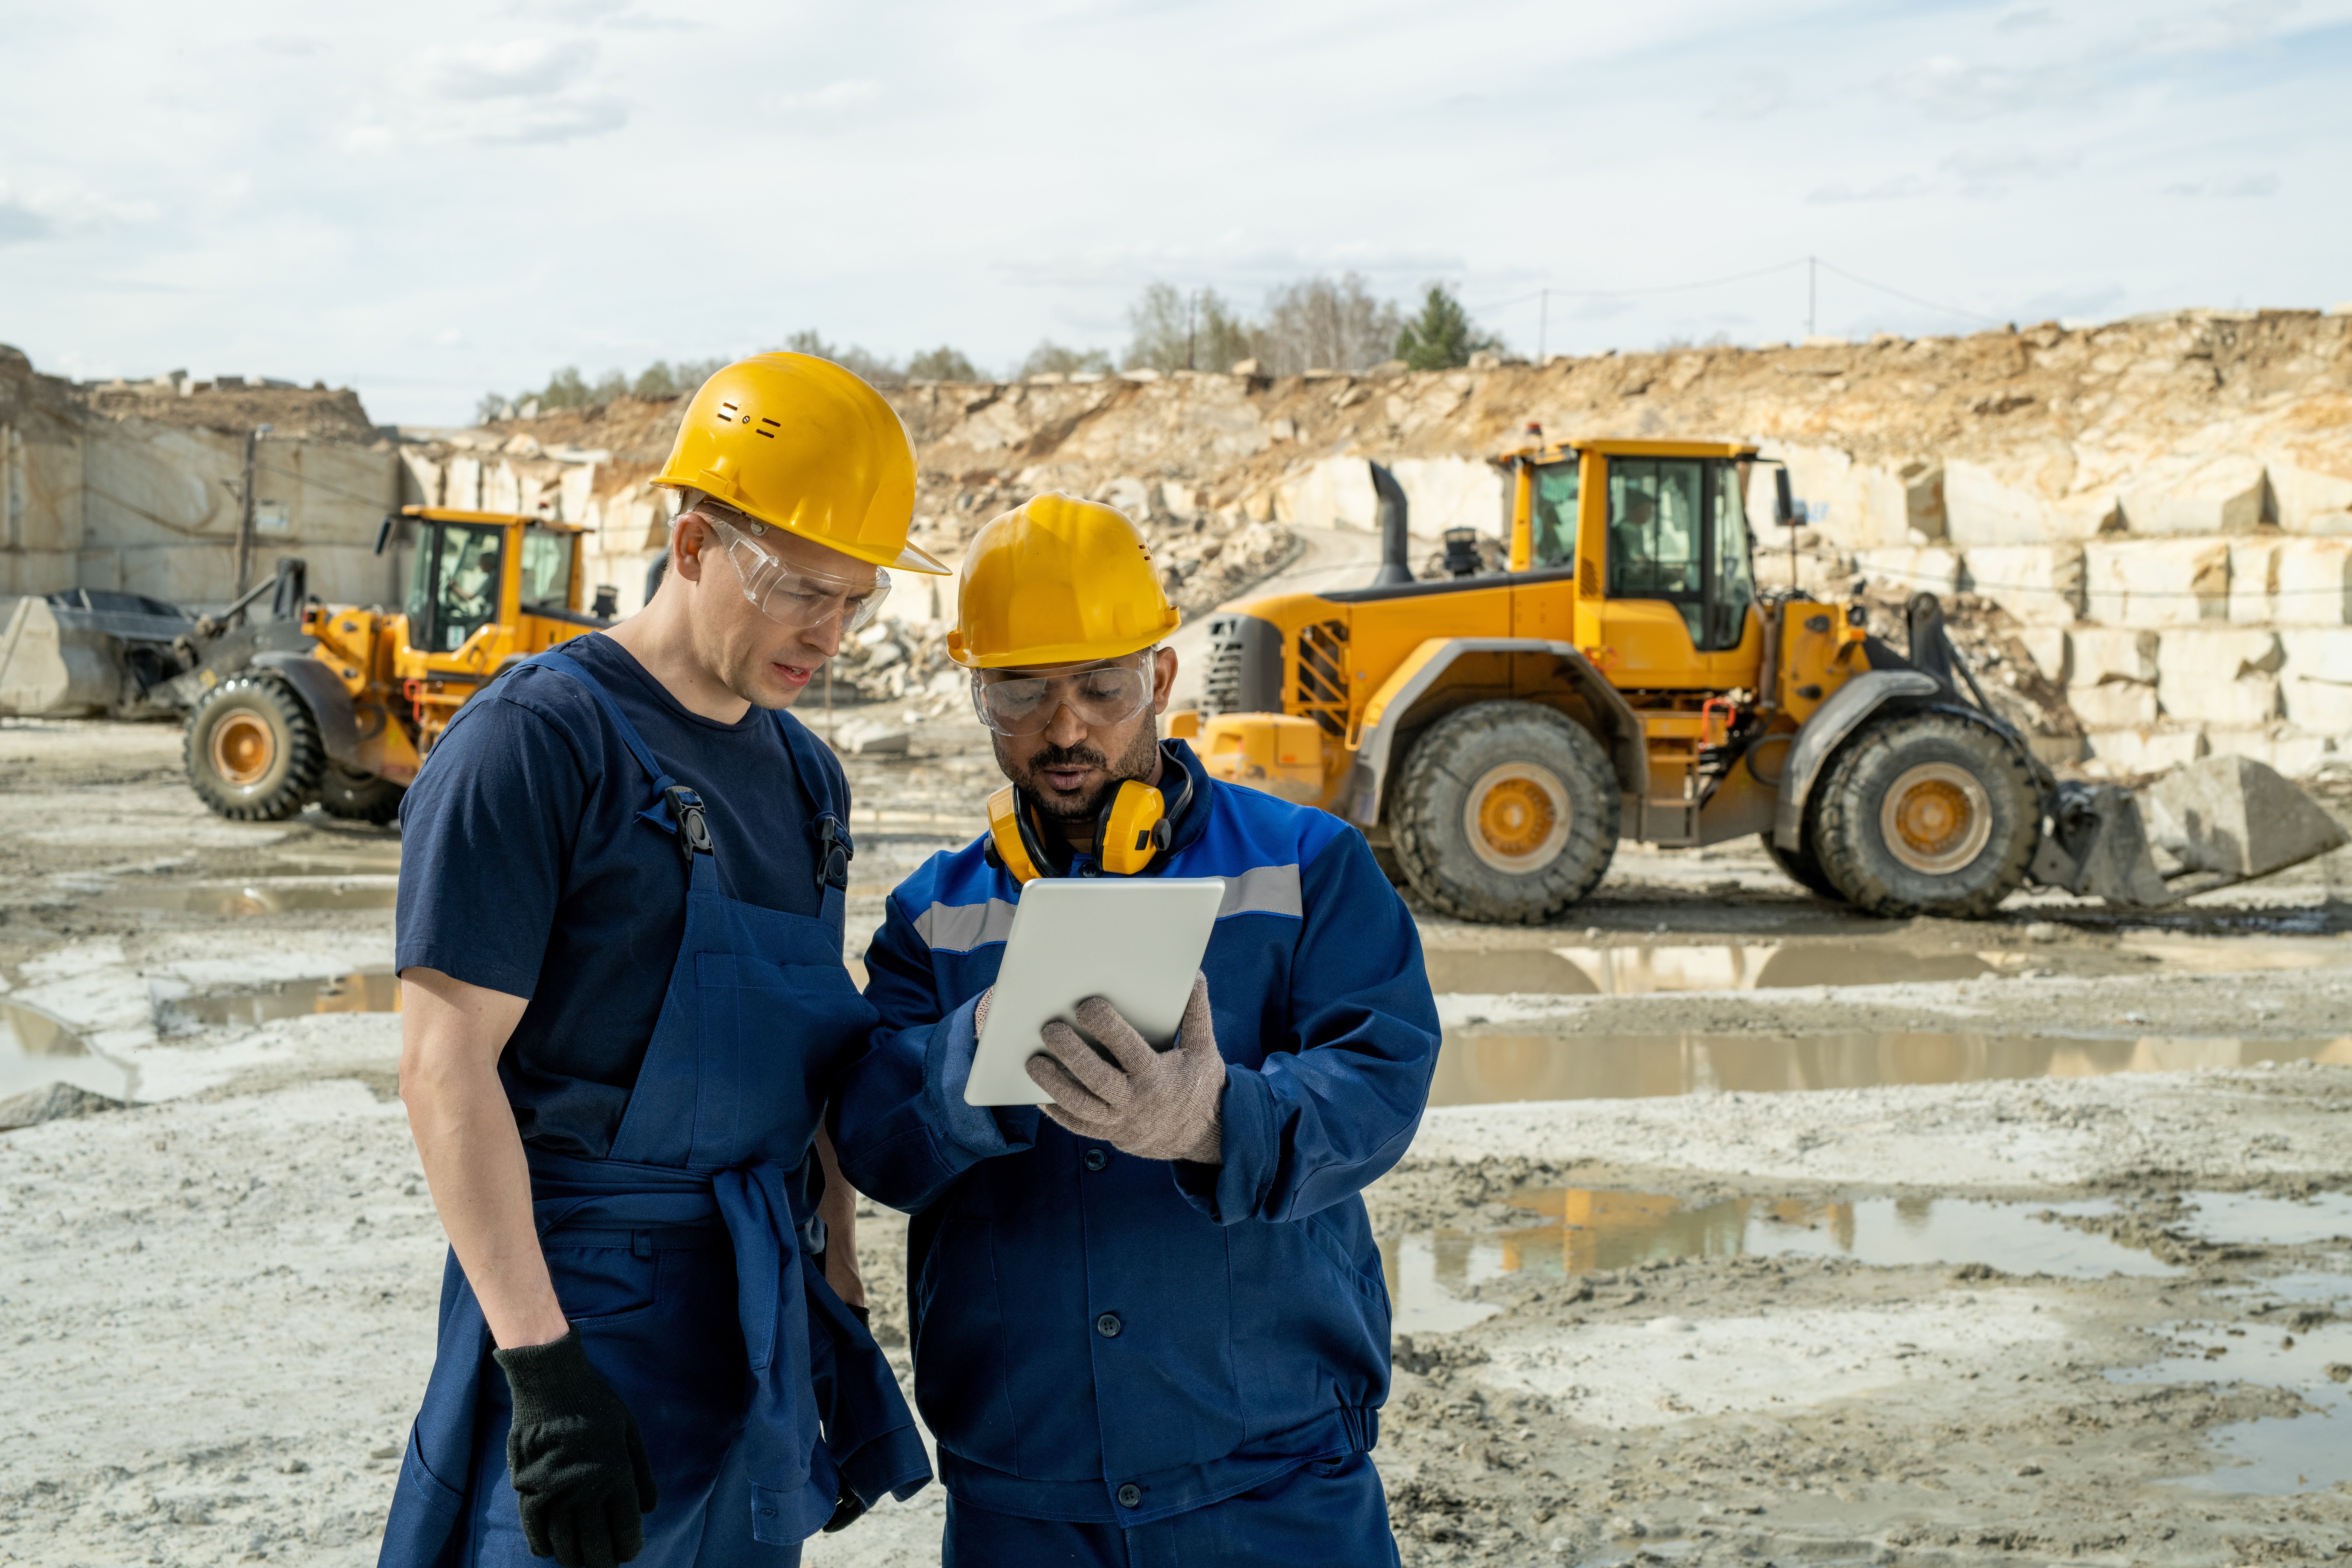 The Growing Use of Technology in the Mining Industry